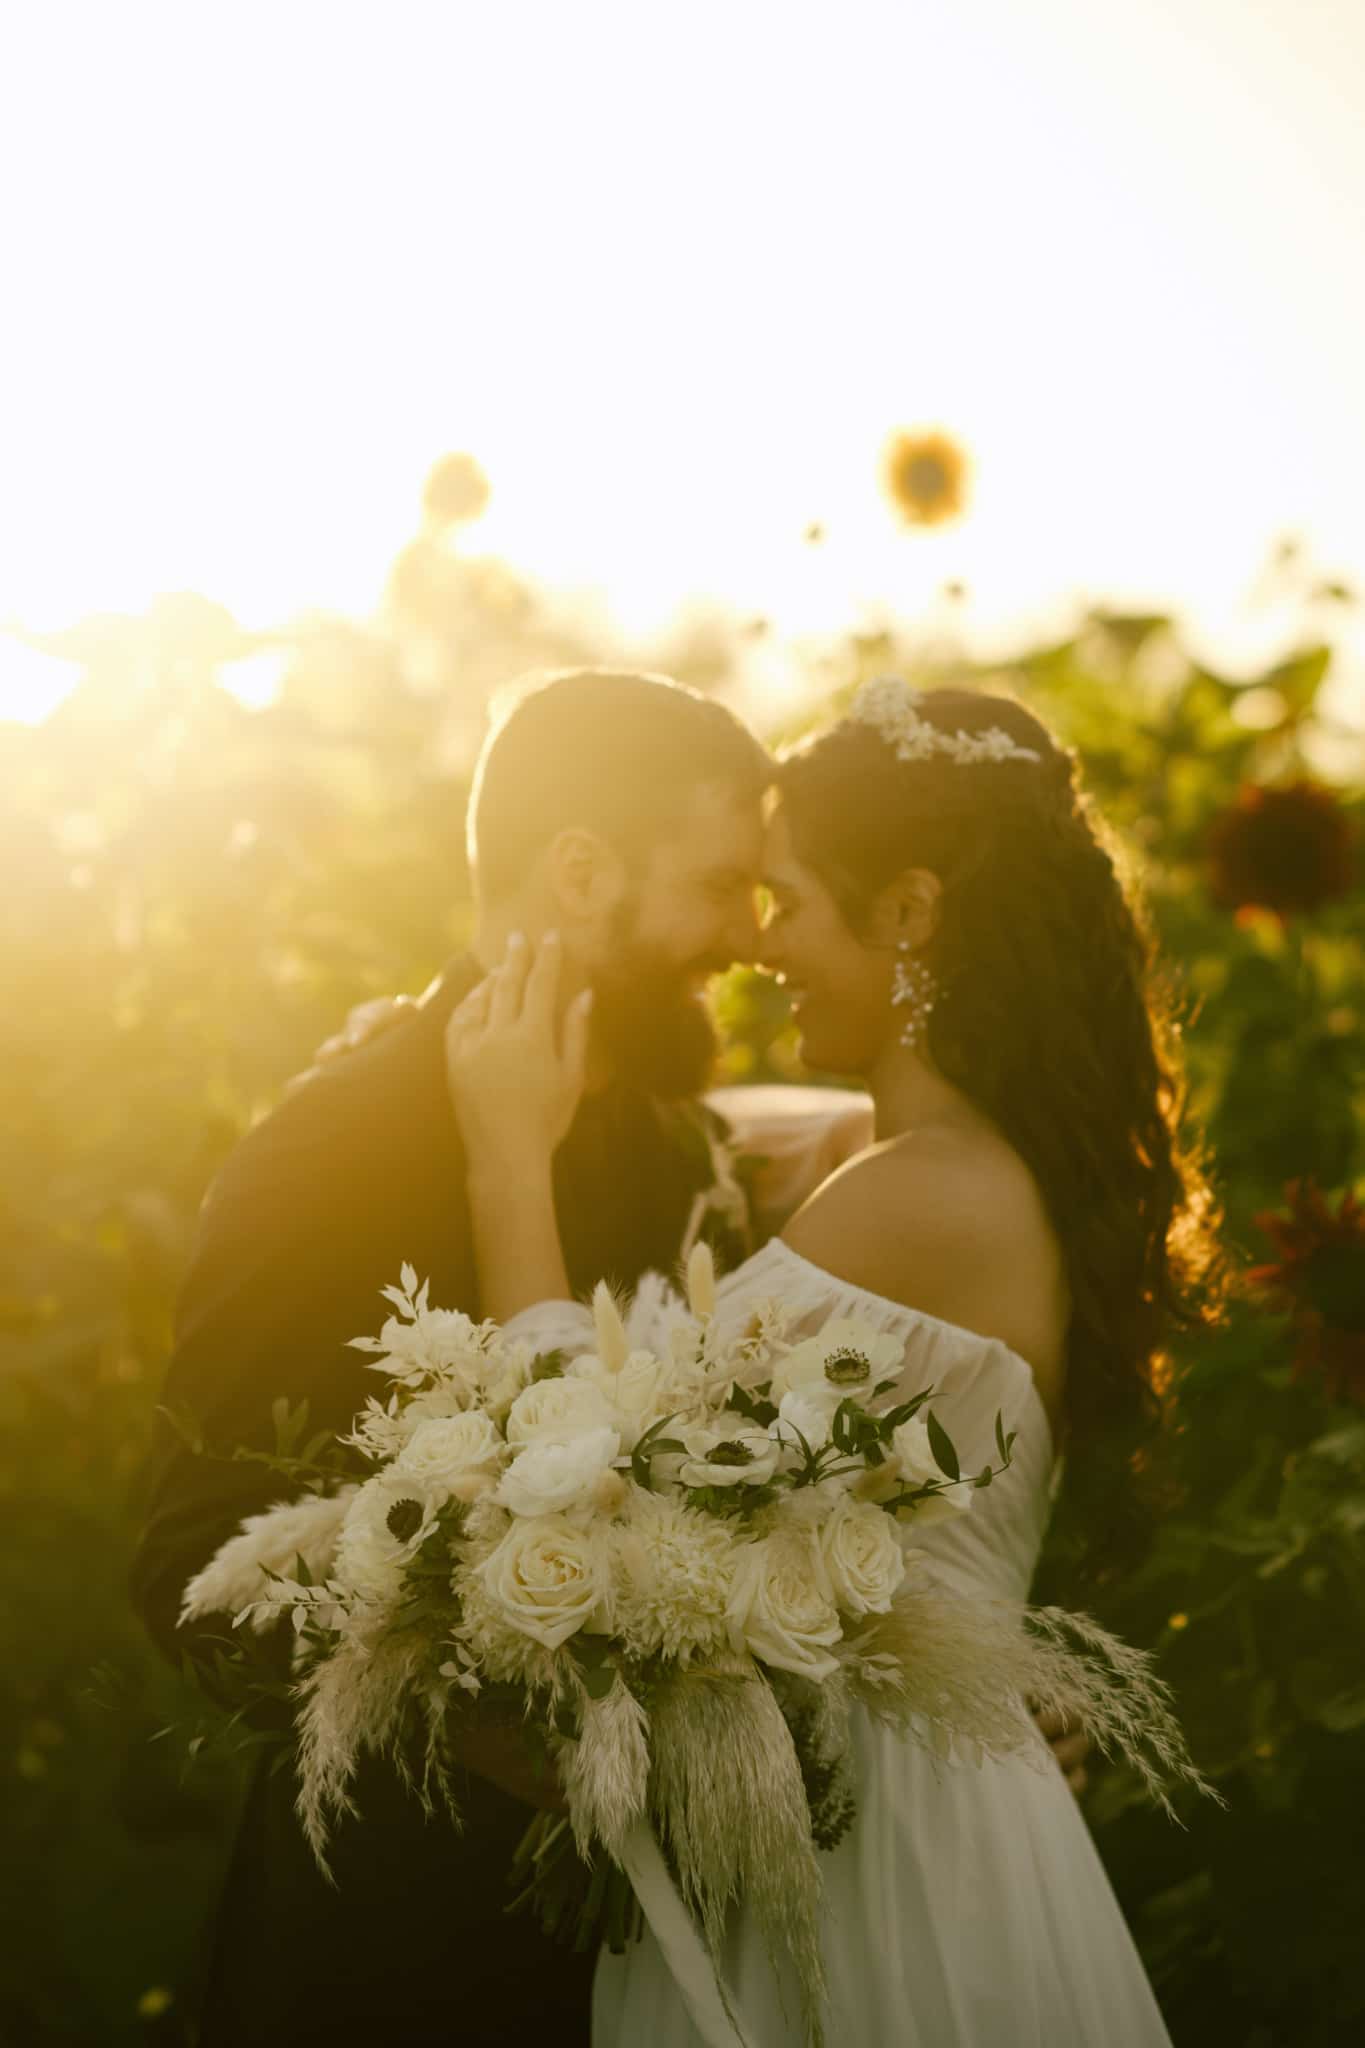 close up image of couple on wedding day touching foreheads and smiling while bouquet is in front of them